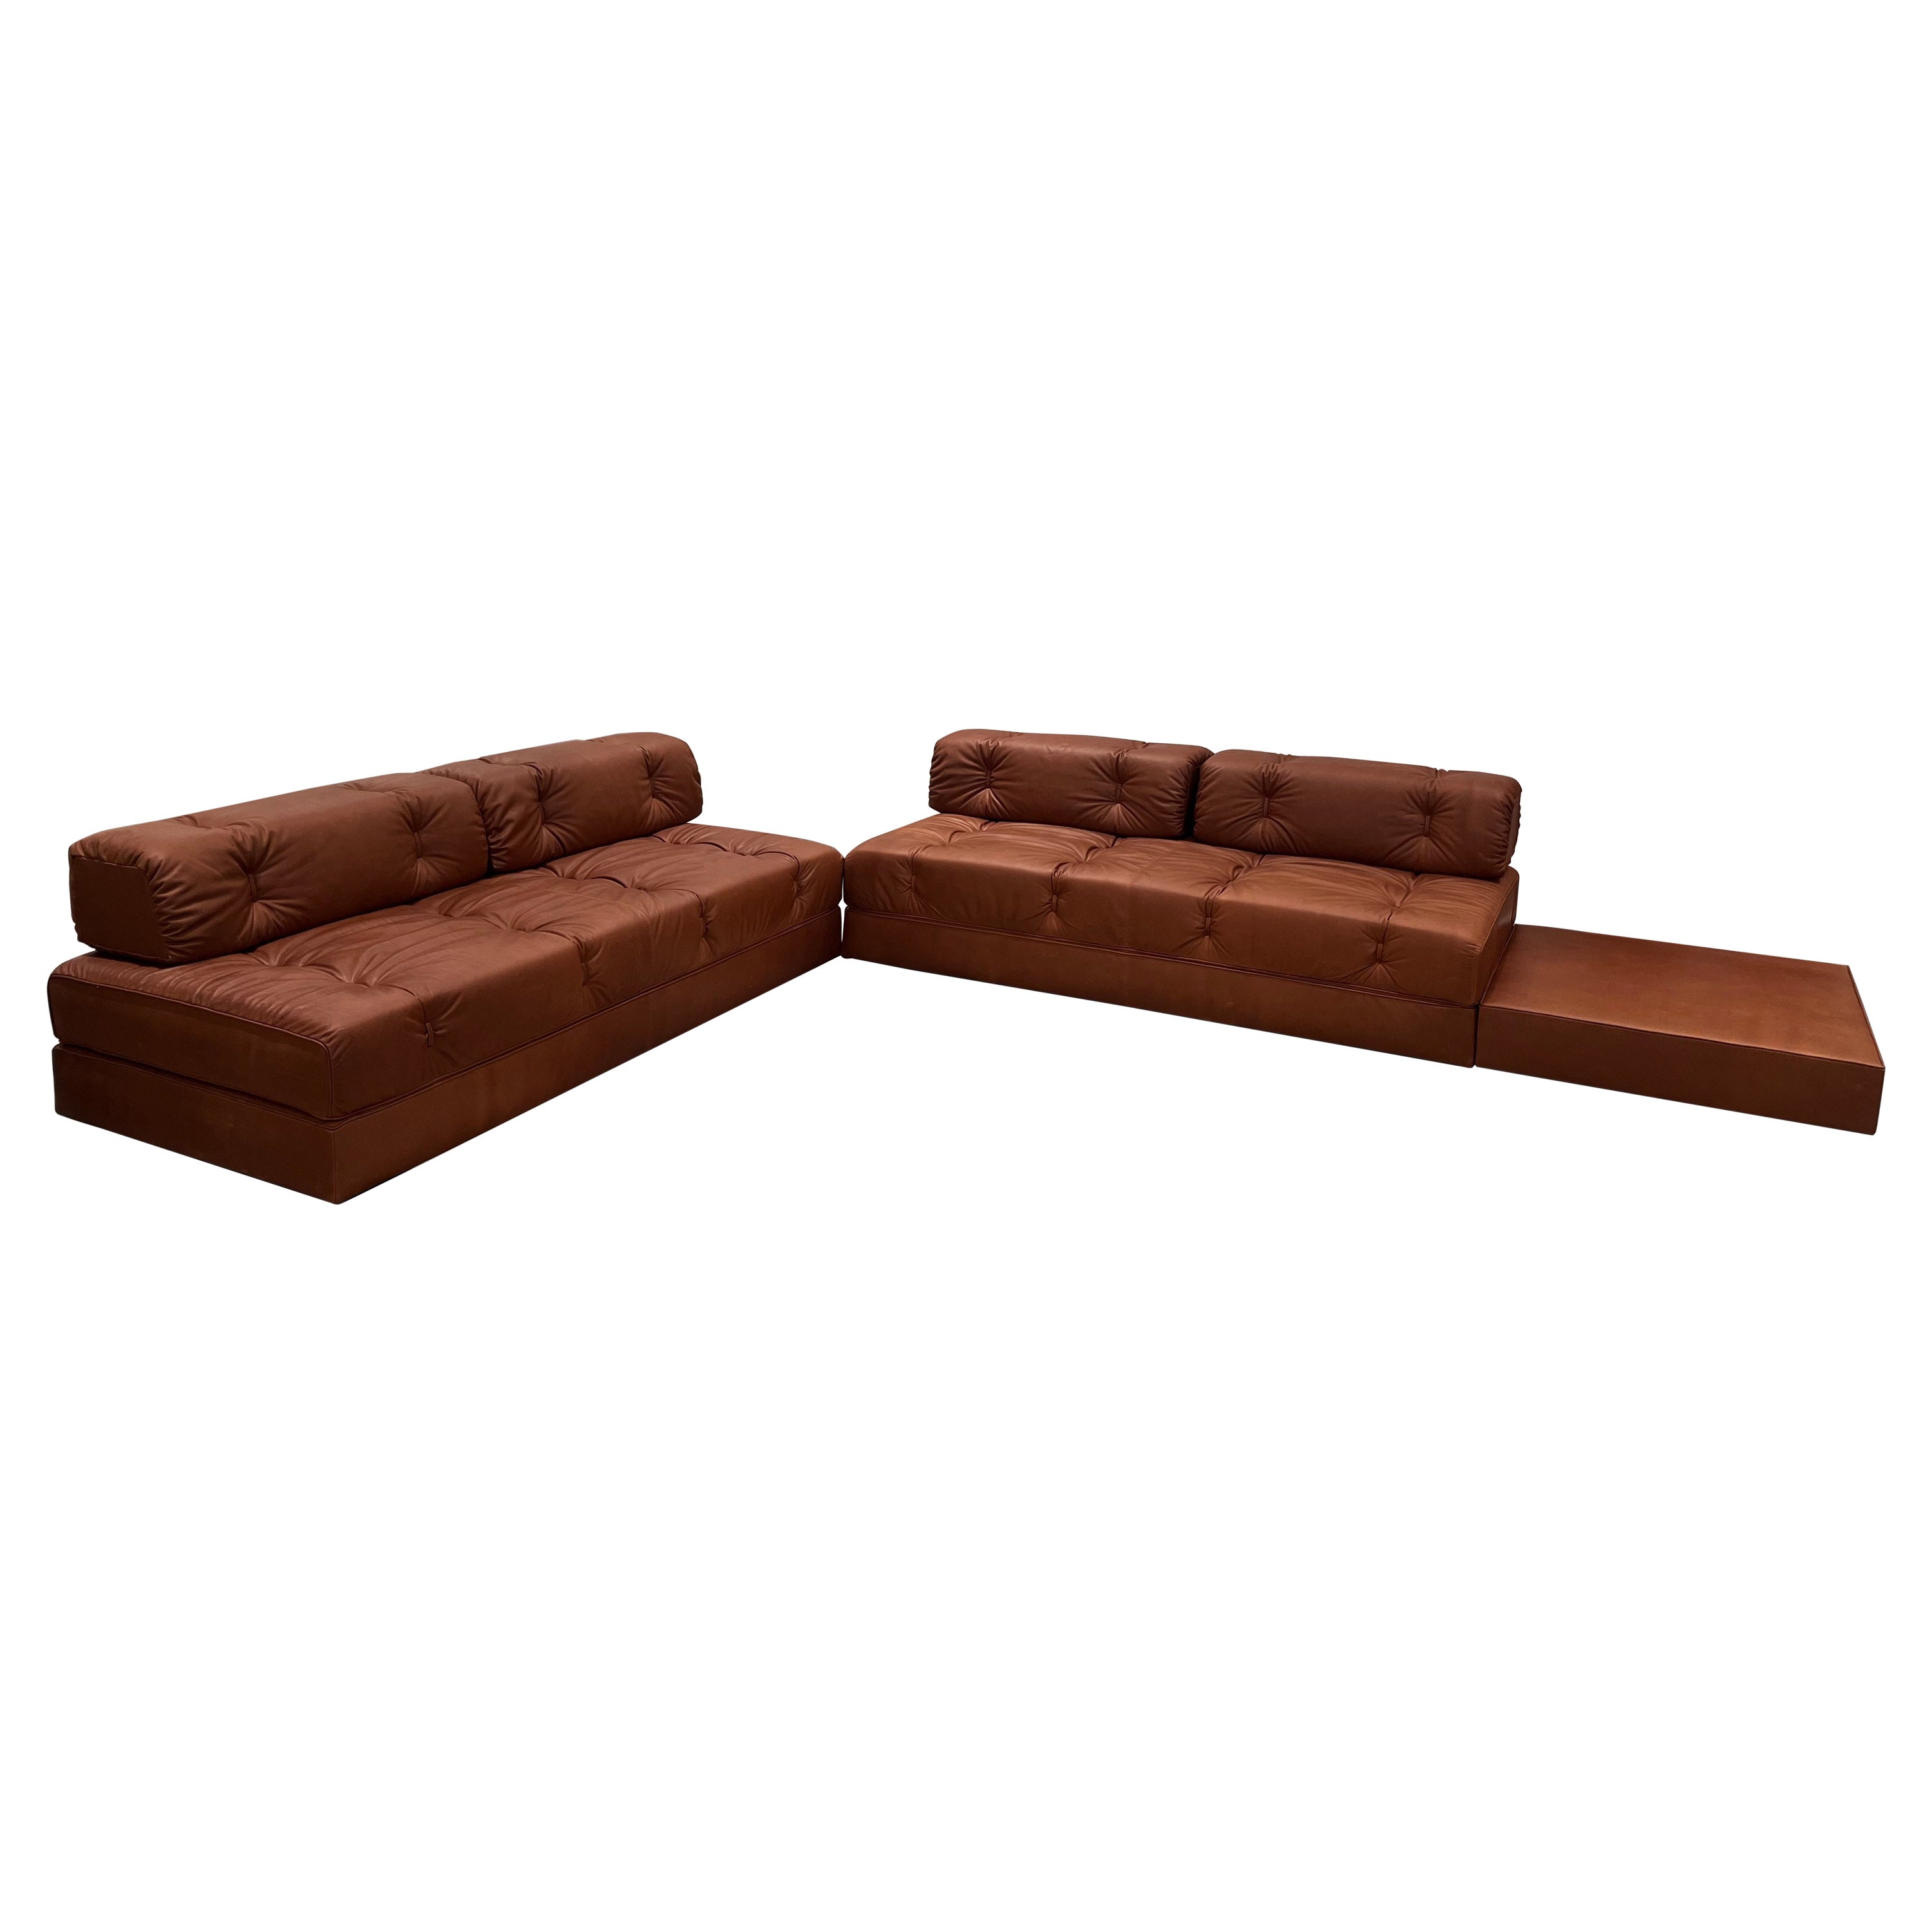 Wittmann Leather Atrium Sofa Beds by Wittmann Workshop in STOCK For Sale